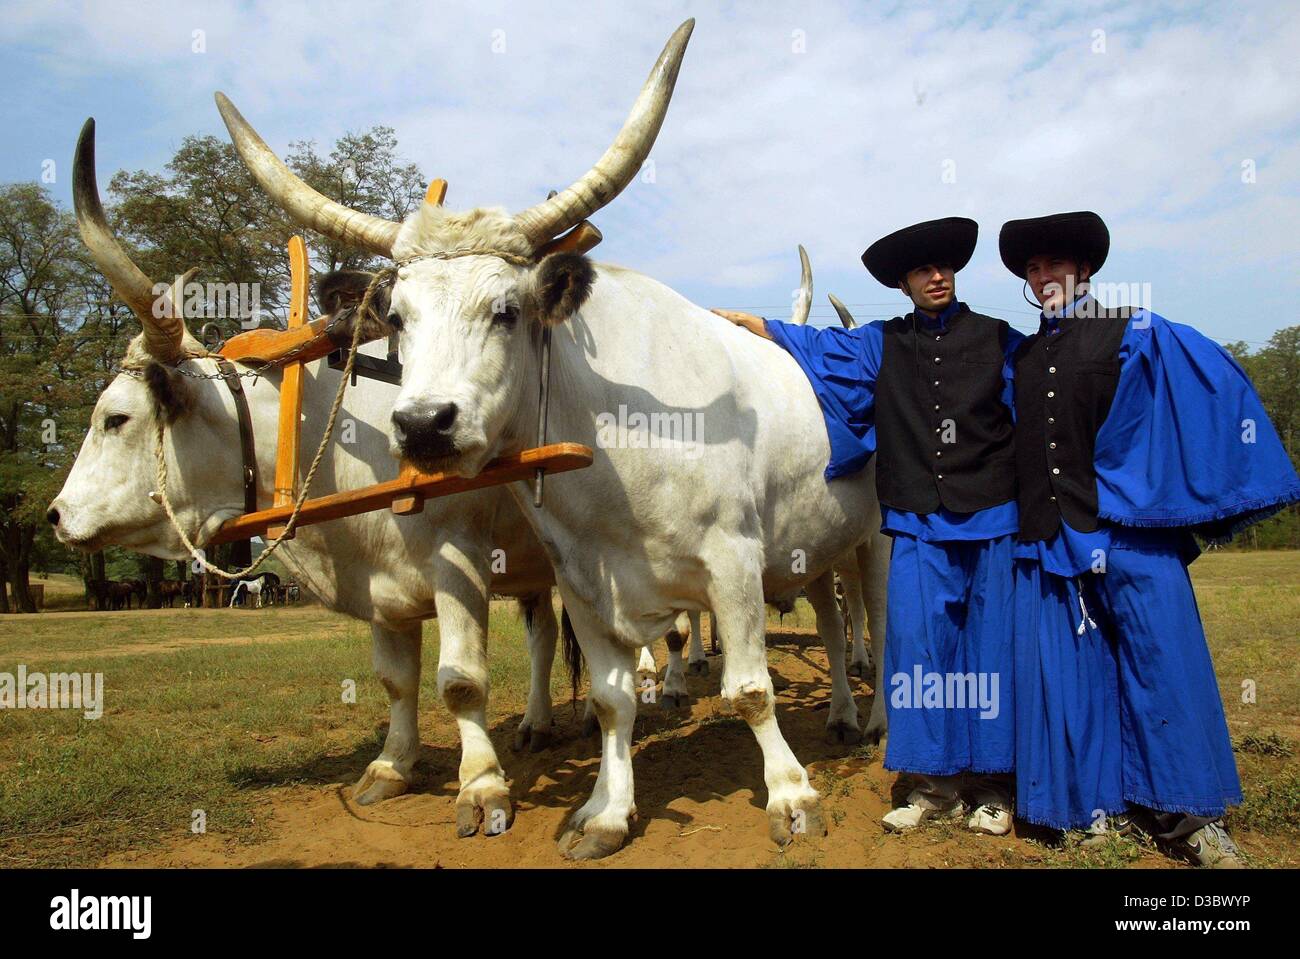 (dpa) - The two German formula one pilots Nick Heidfeld (R) and Heinz-Harald Frentzen (L), both of the Sauber-Petronas team, are dressed up as Puszta shepherds as they pose next to a team of oxen in Gueduellue near Budapest, Hungary, 21 August 2003. The 13th run of the world championships, the Grand Stock Photo